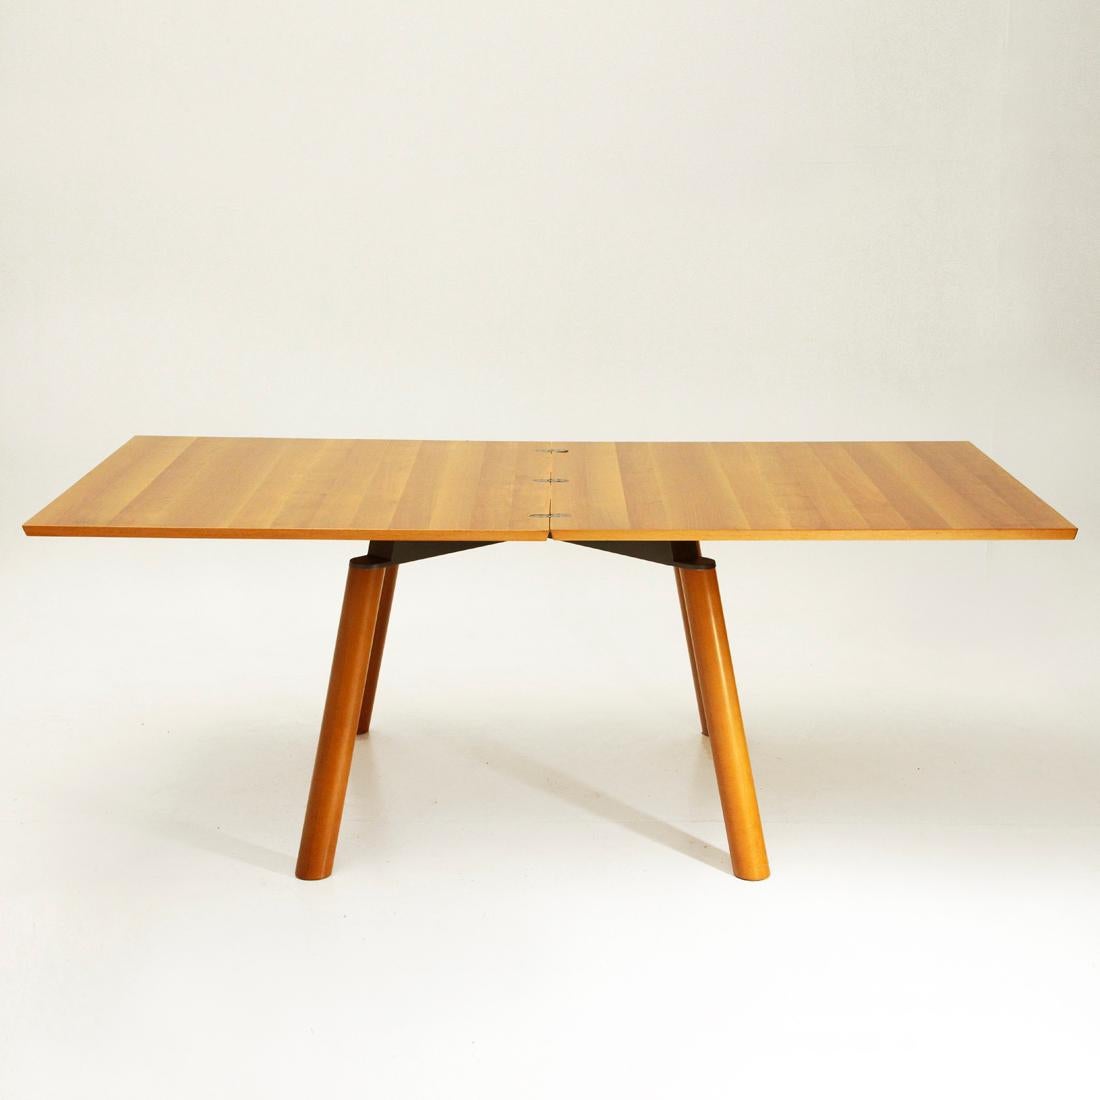 Late 20th Century Italian Post Modern Extensible Dining Table, 1980s